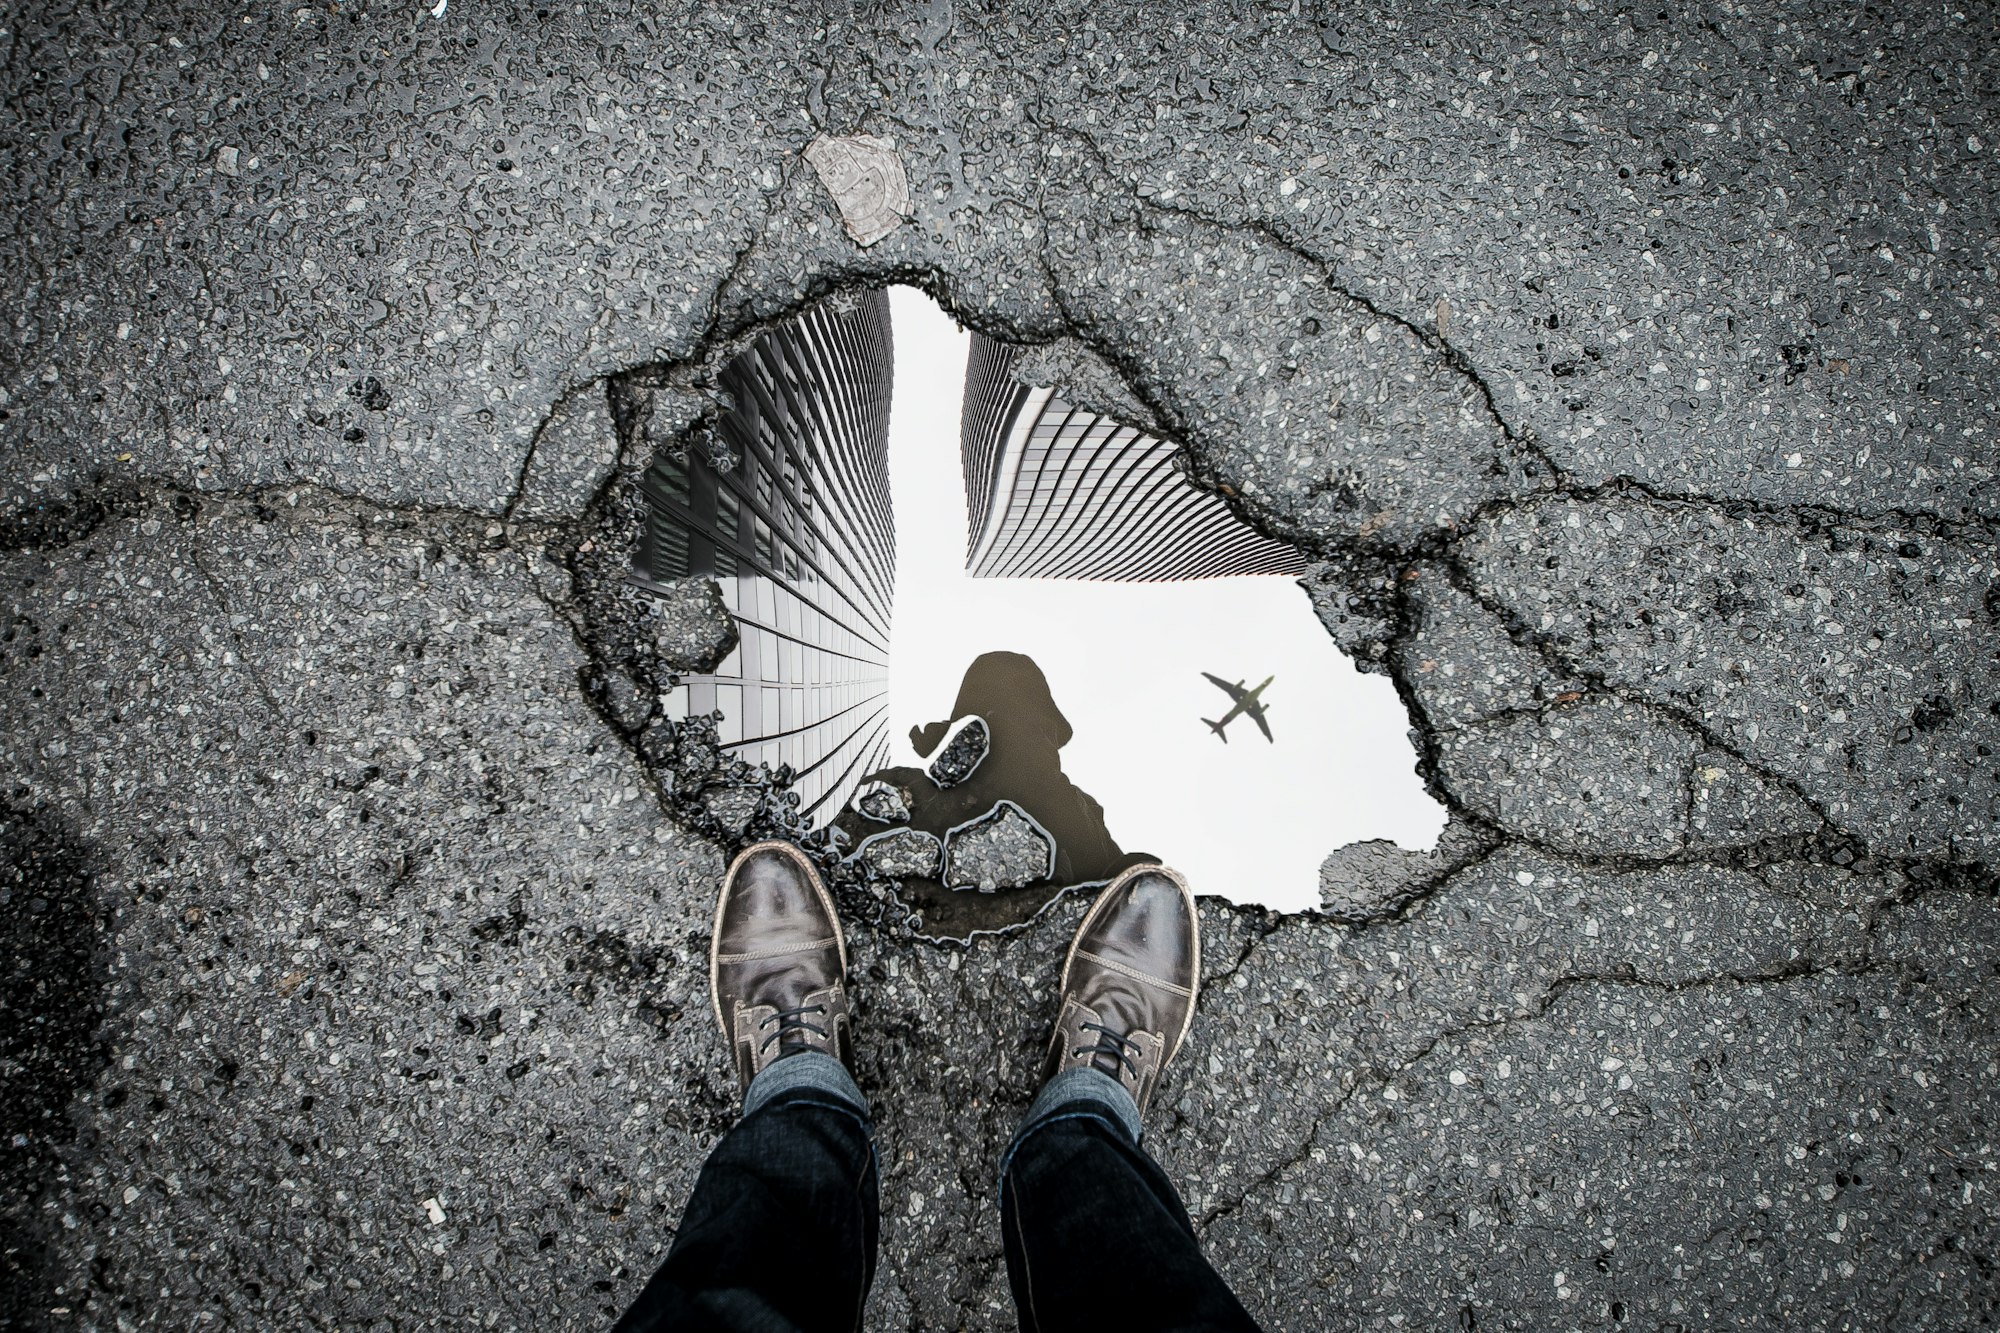 A shot of a puddle, which is reflecting tall buildings and an airplane.